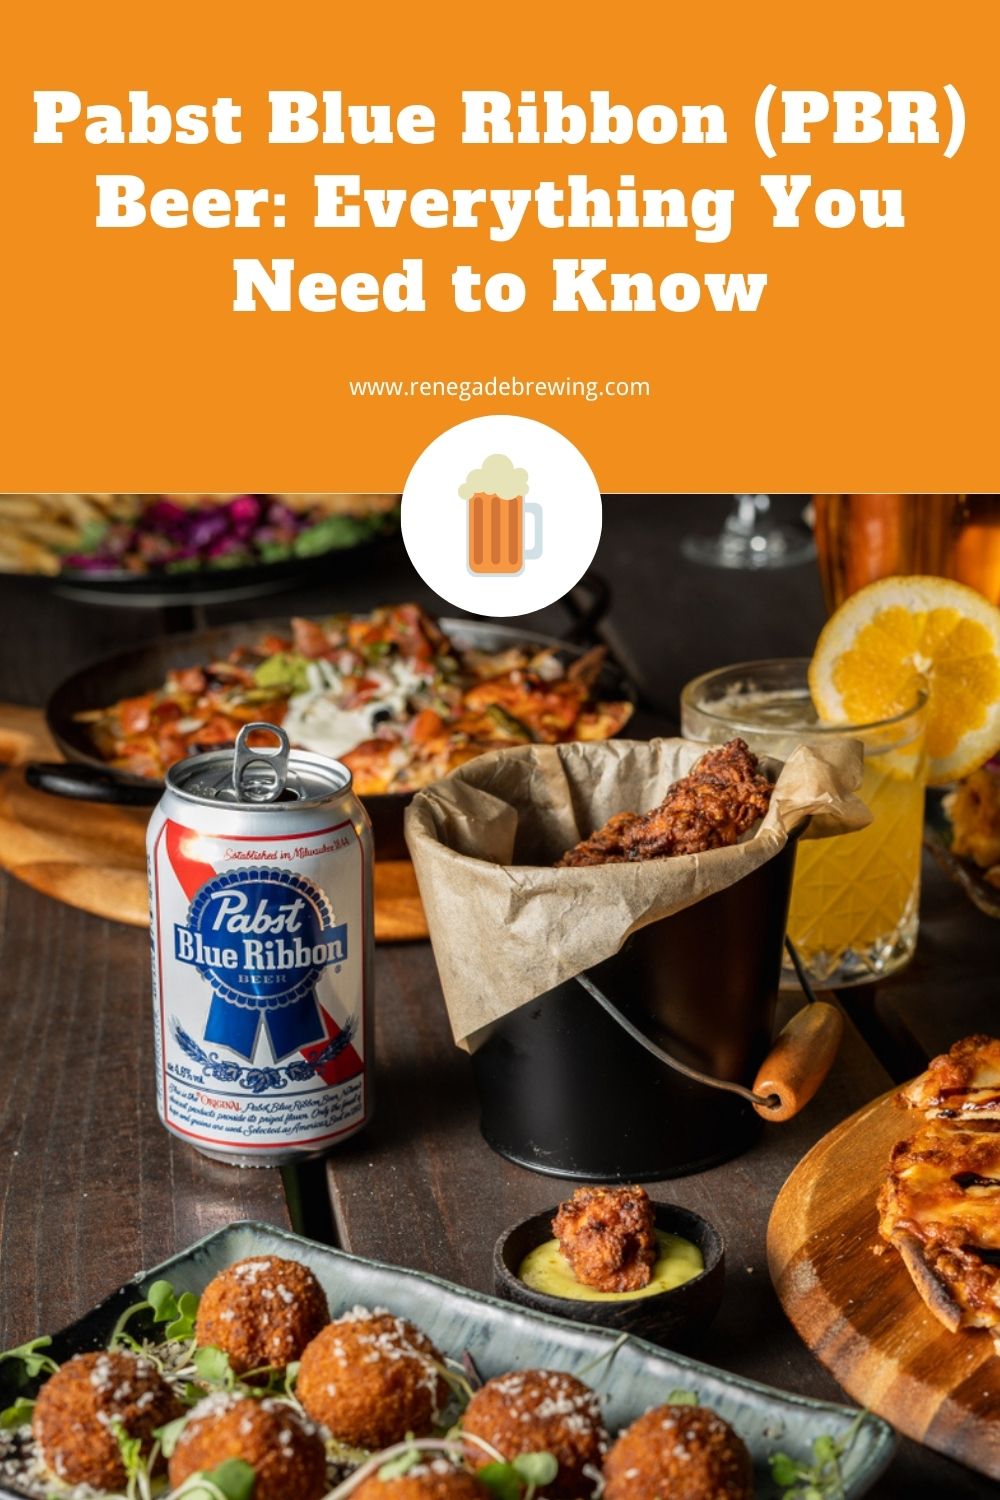 Pabst Blue Ribbon (PBR) Beer Everything You Need to Know 2